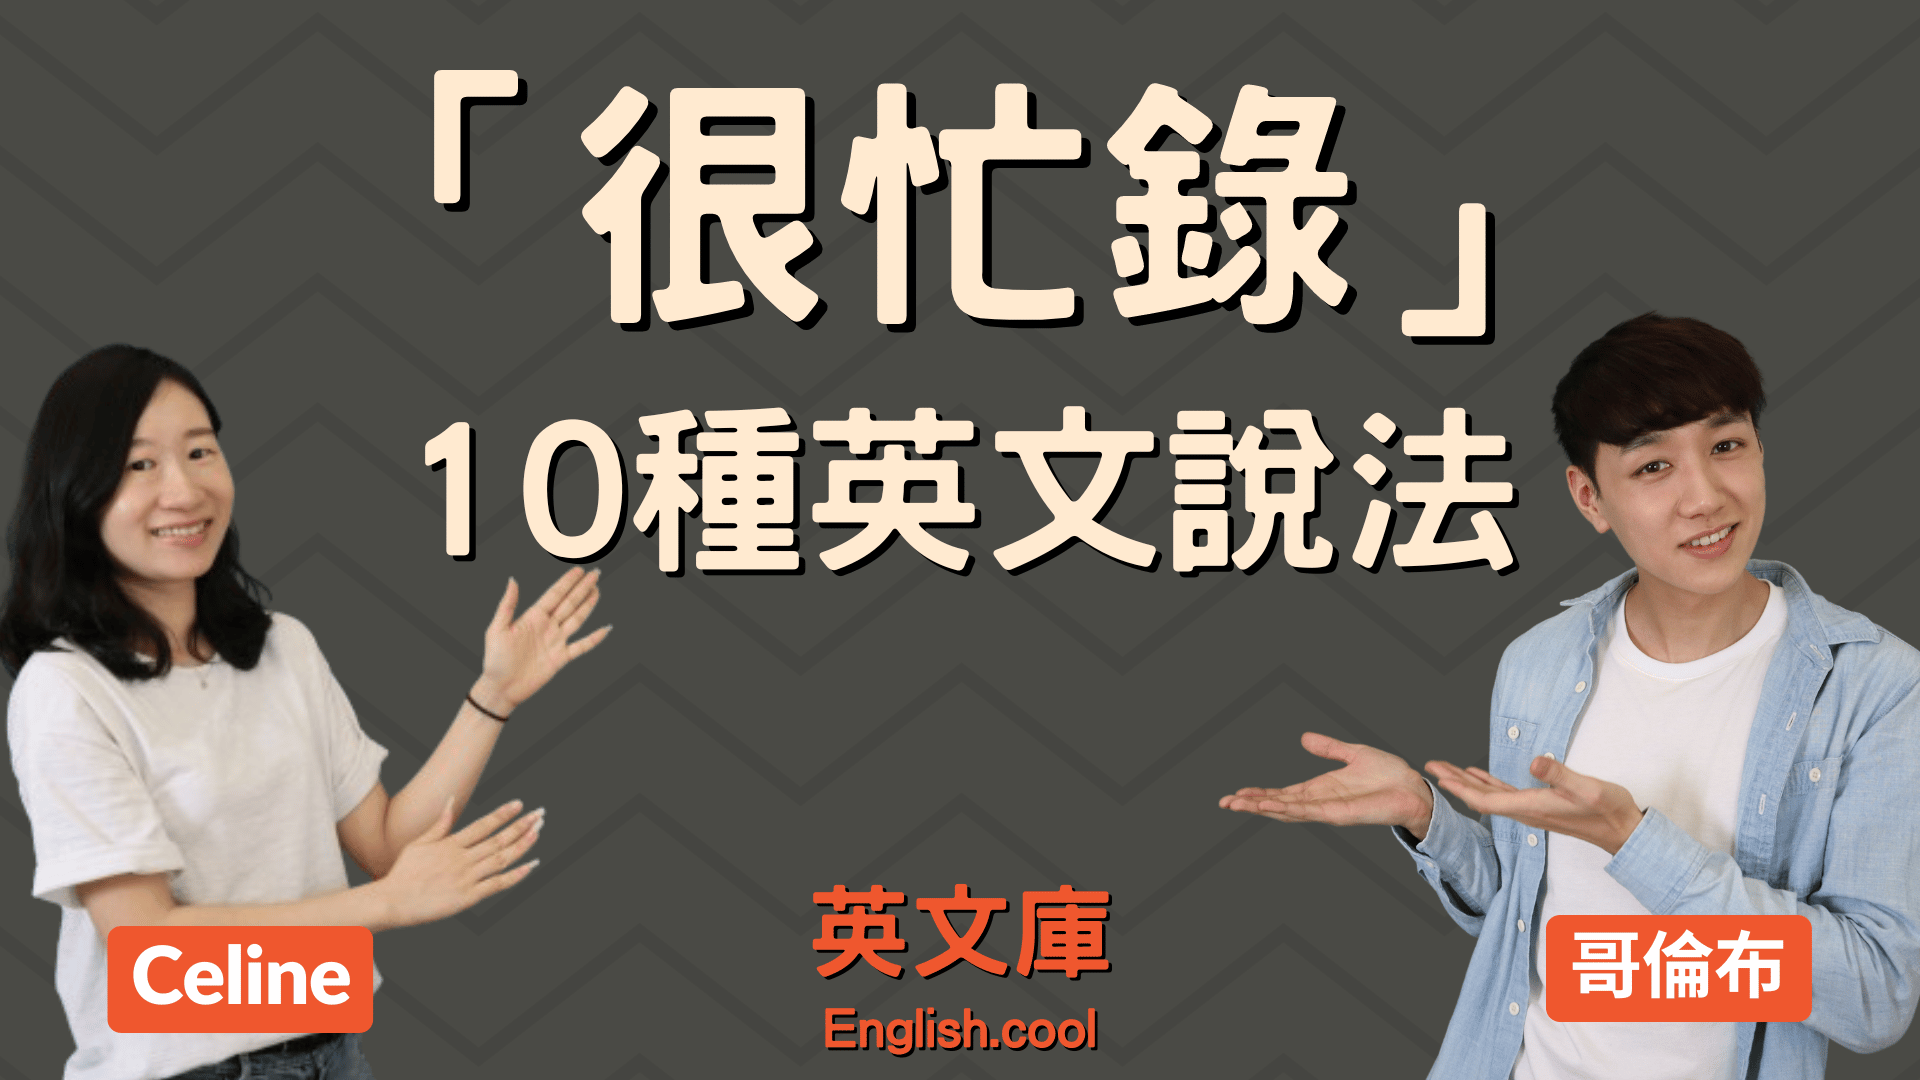 You are currently viewing 「很忙錄」10 種英文說法！除了 I’m busy 還可以用什麼？